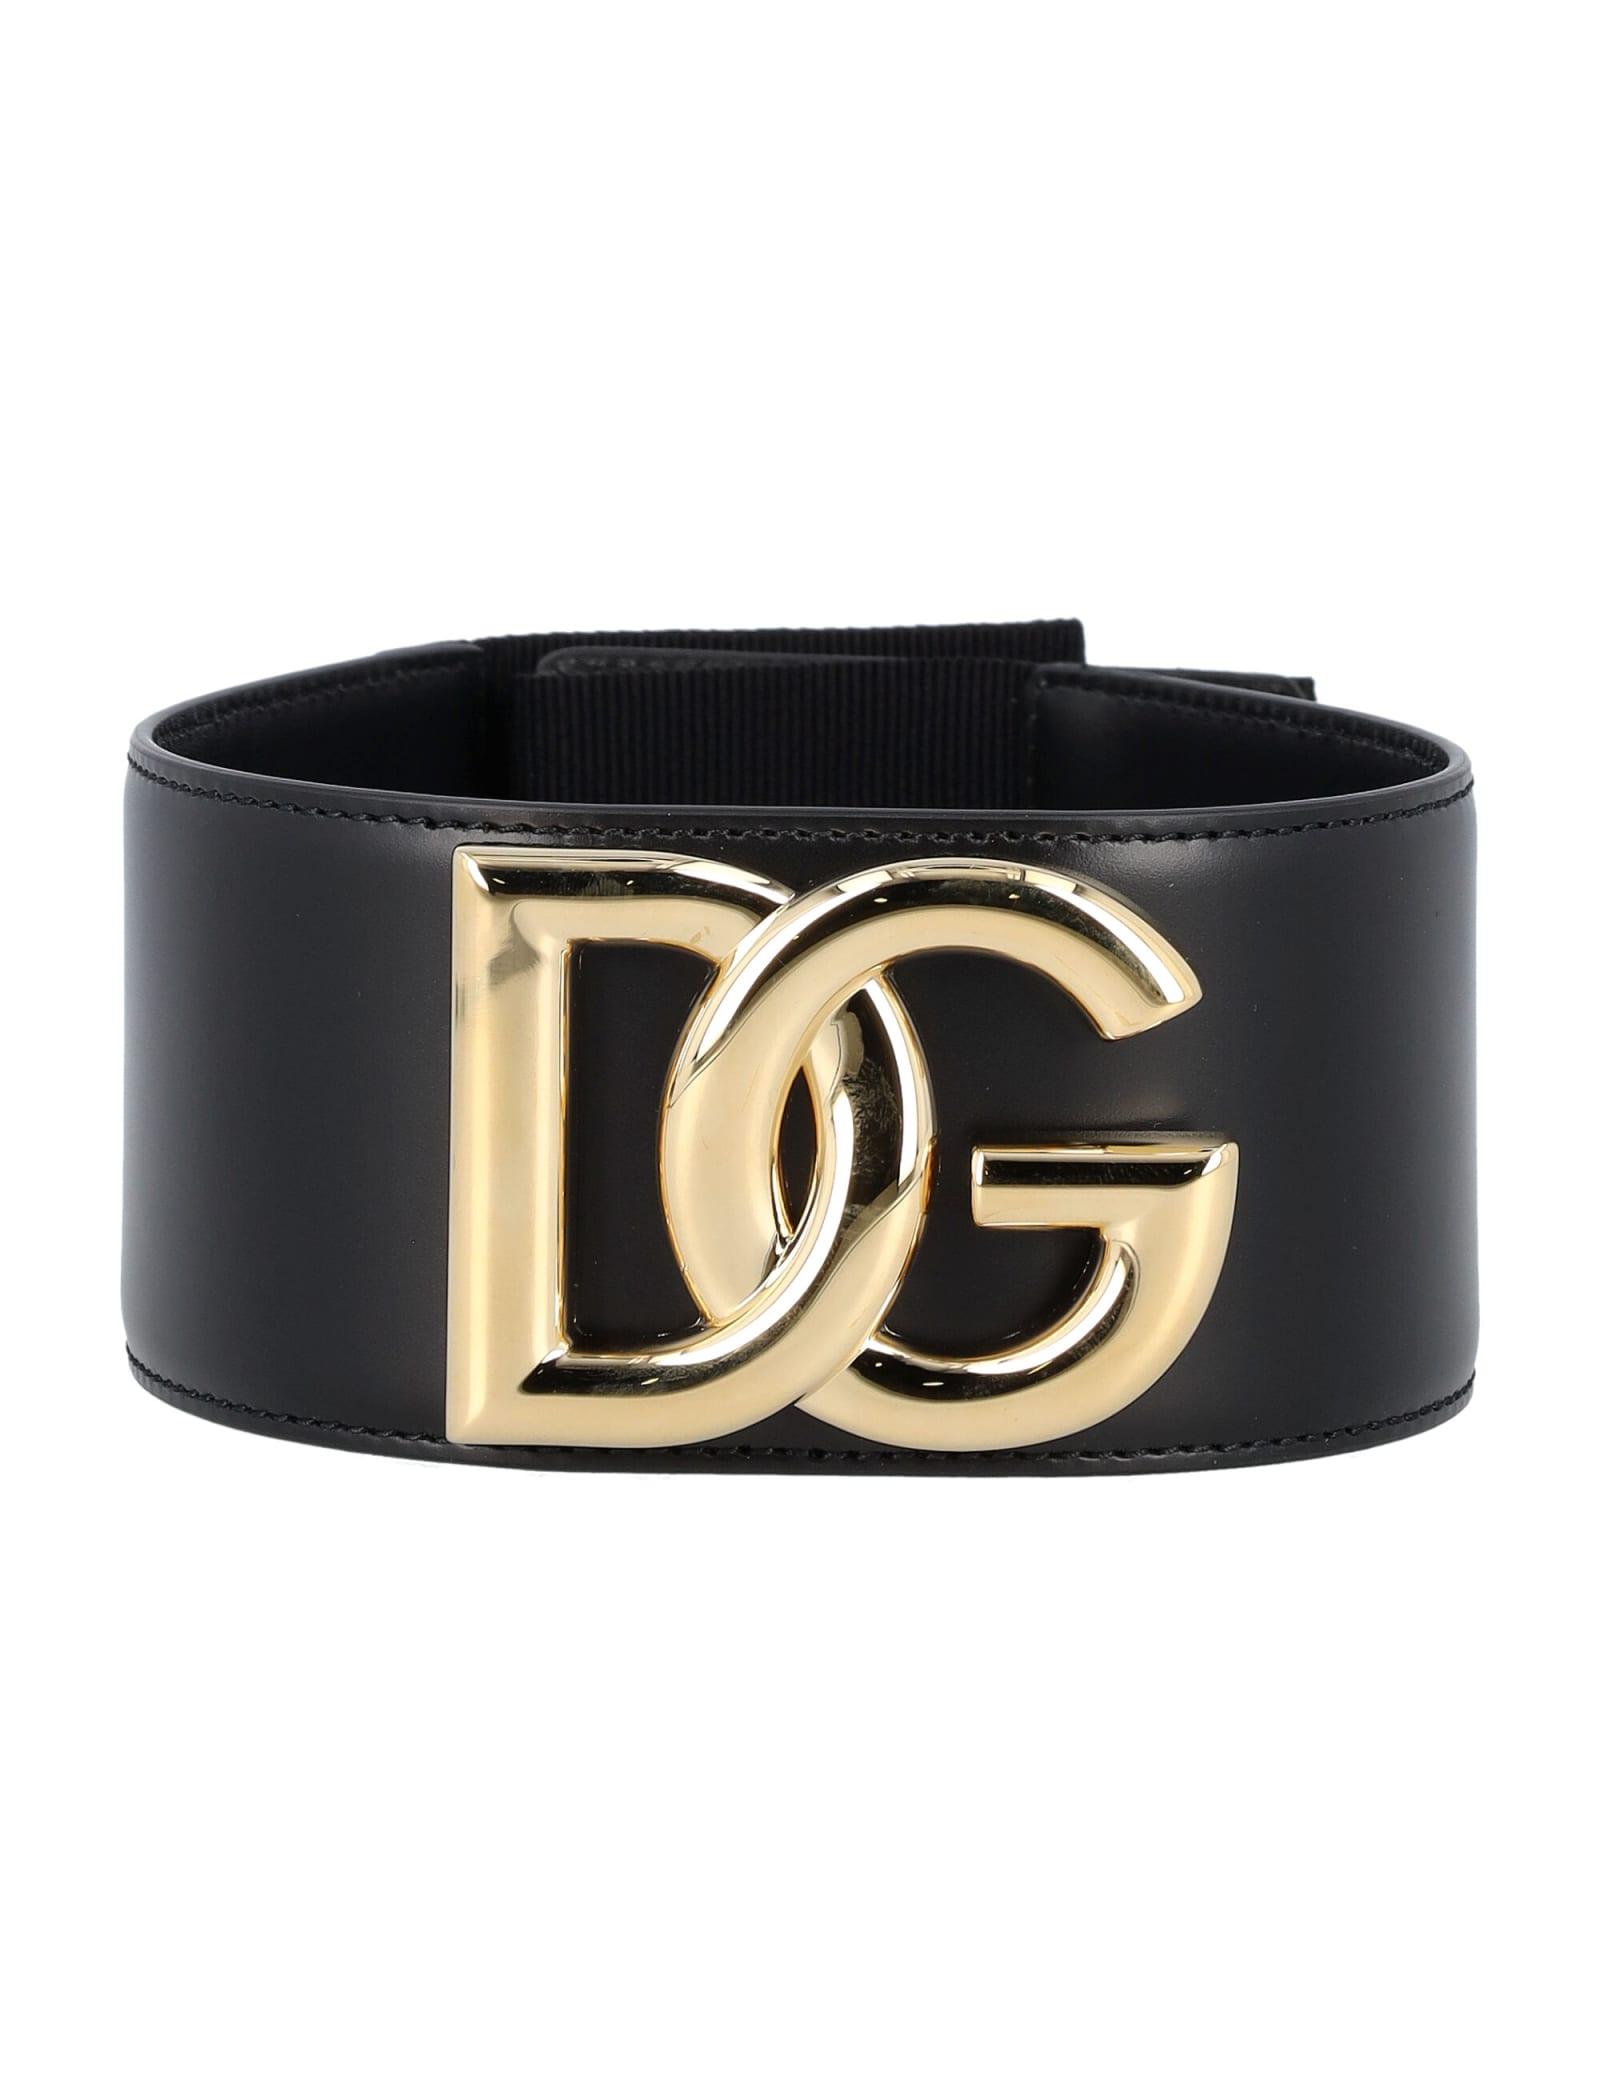 Dolce & Gabbana Stretch Band And Lux Leather Belt With Dg Logo in Nero  (Black) - Save 2% | Lyst